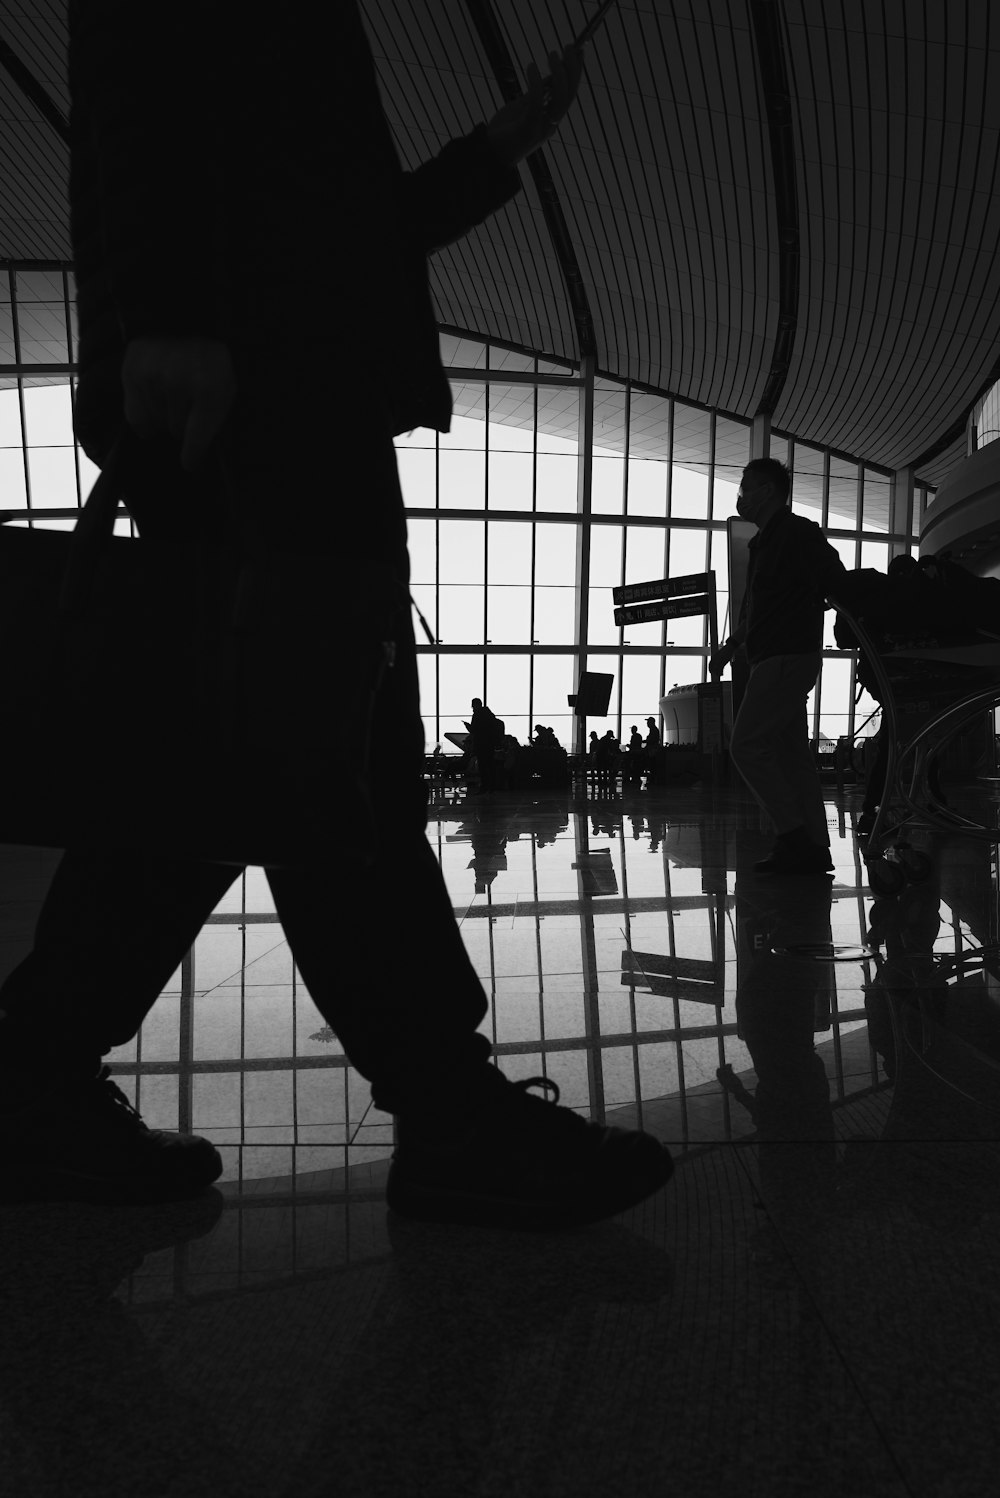 a black and white photo of a person walking through an airport